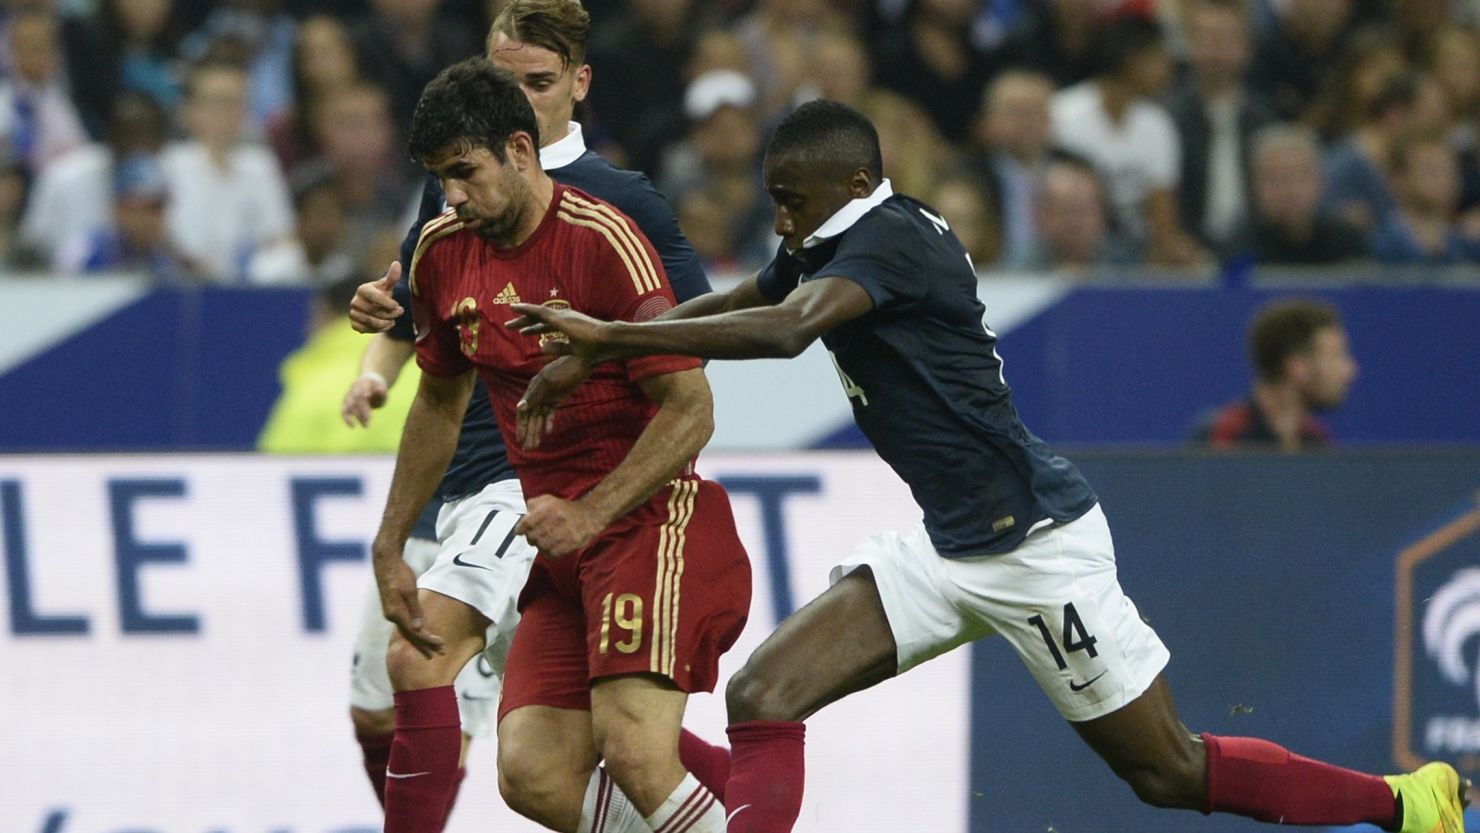 Diego Costa failed to hit the target as Spain suffered a 1-0 defeat against France in Paris.